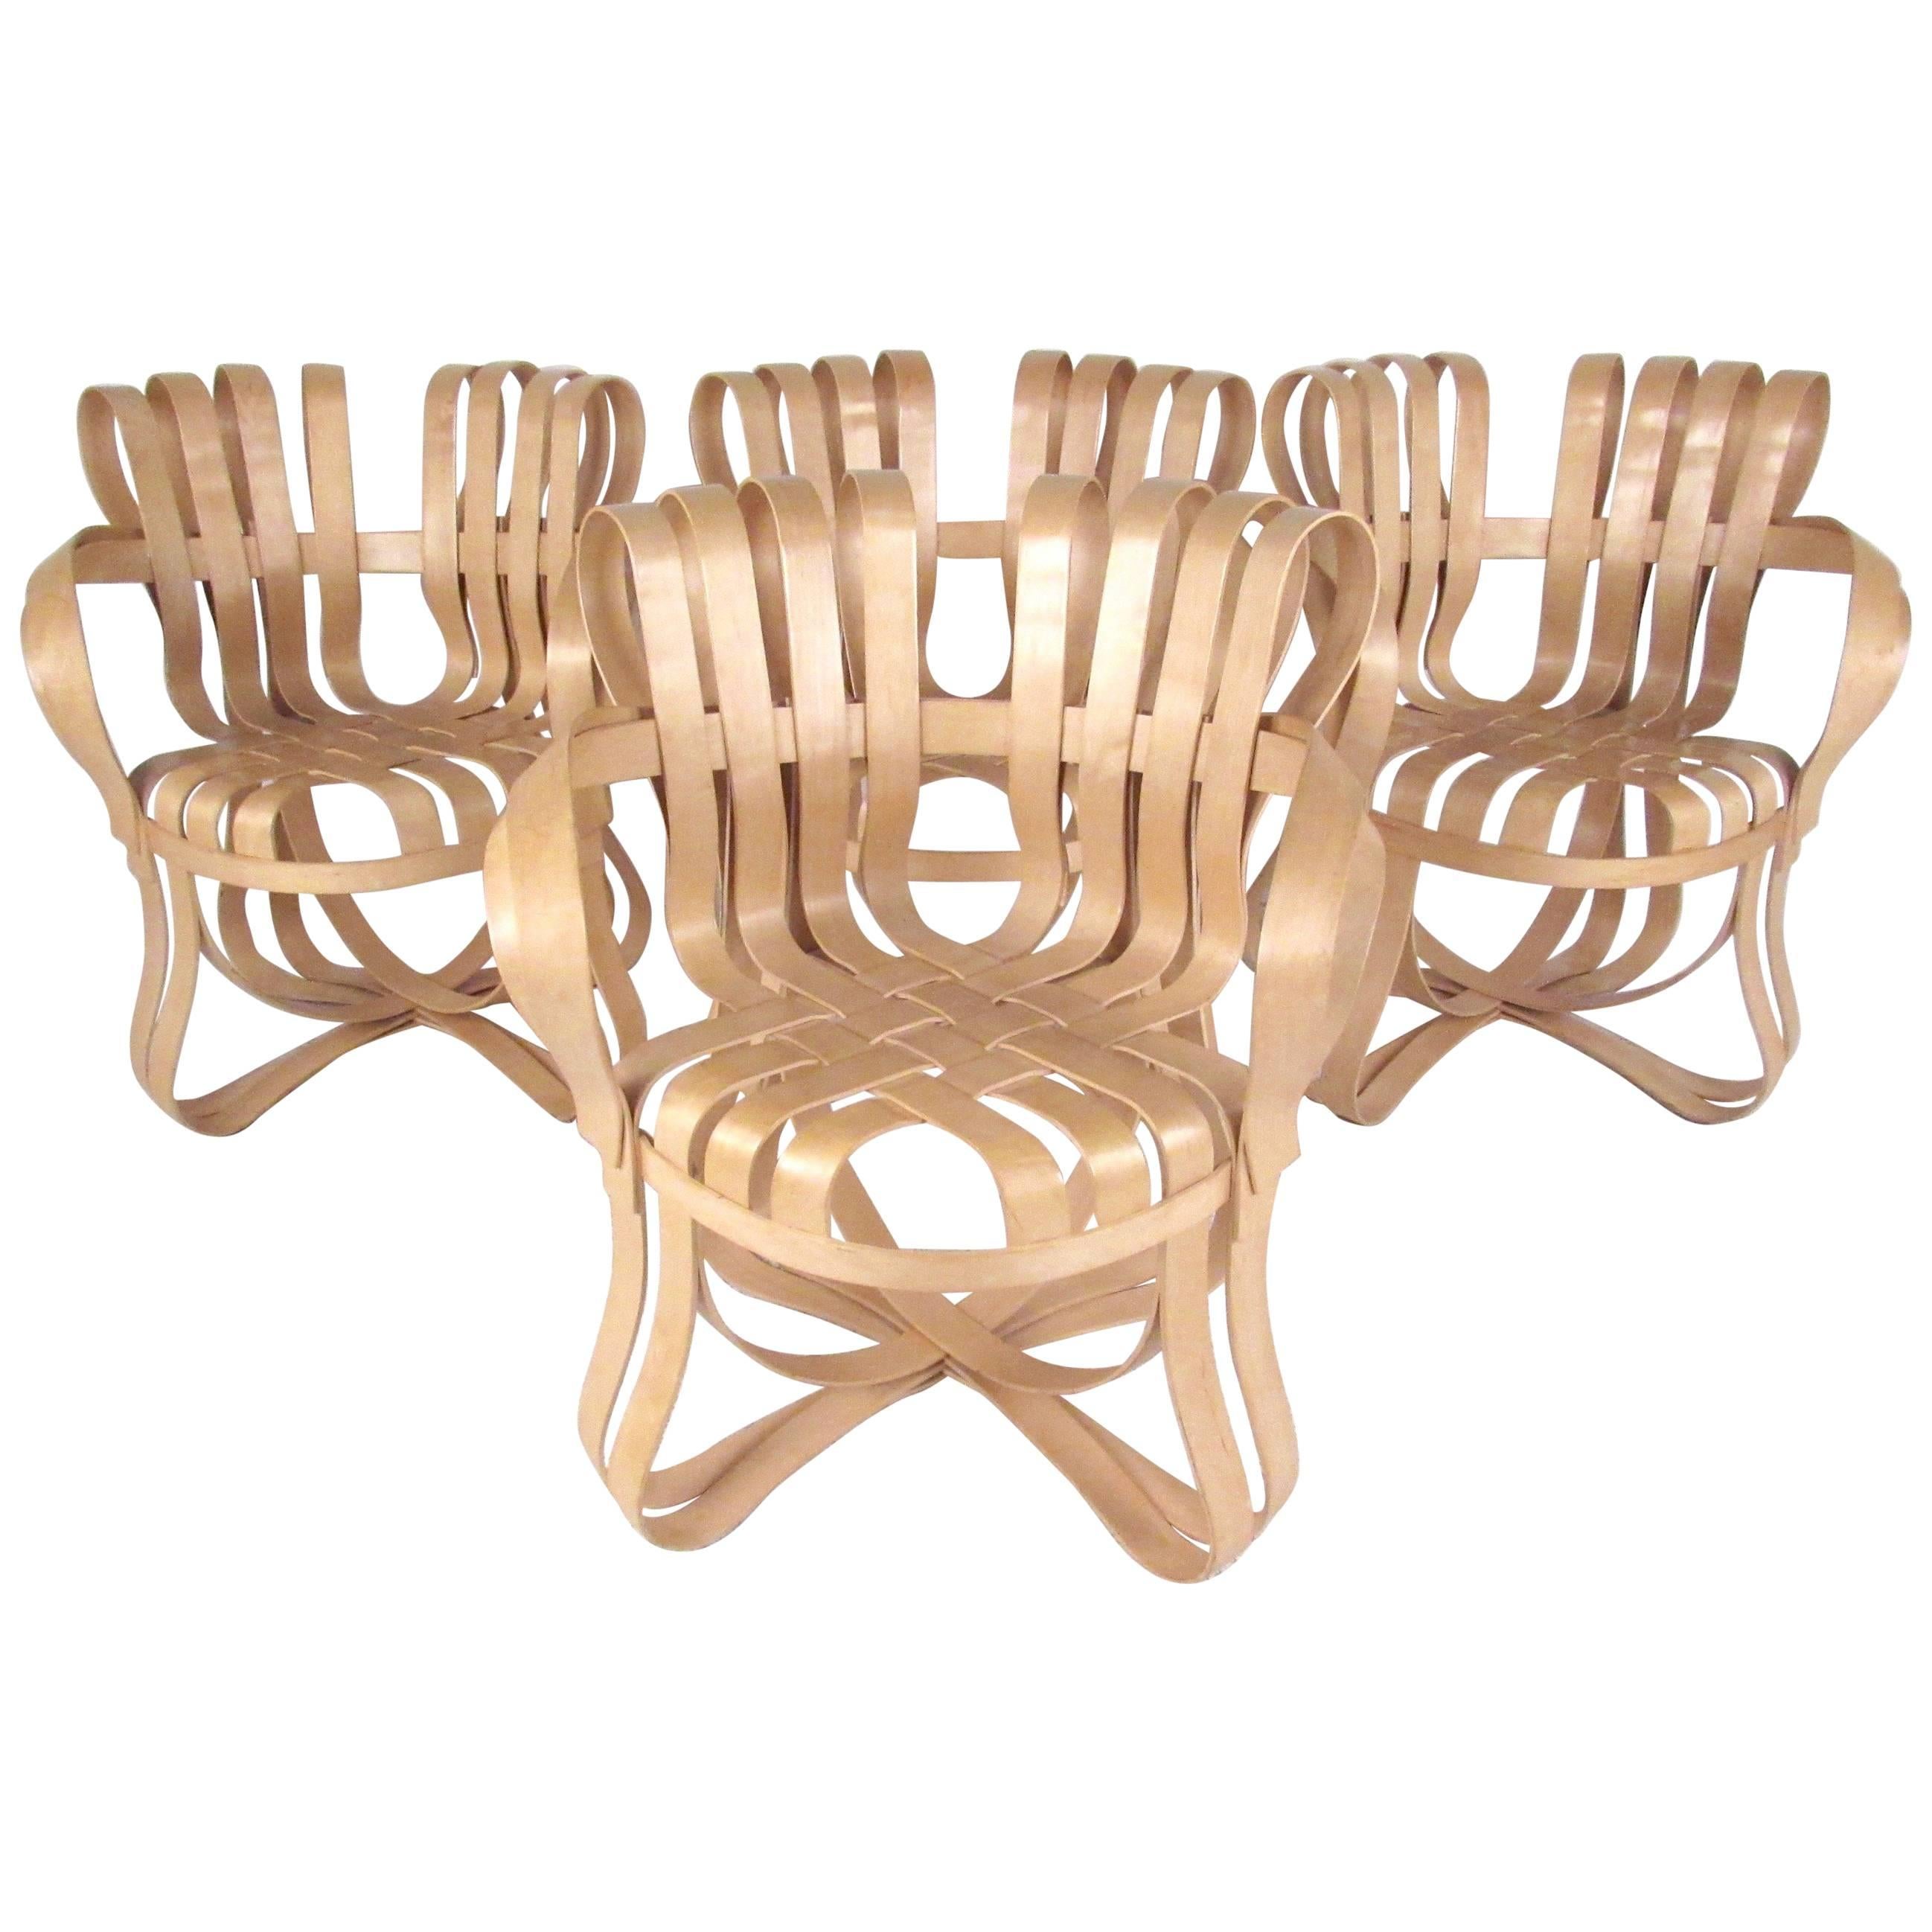 Frank Gehry "Cross Check" Chairs for Knoll